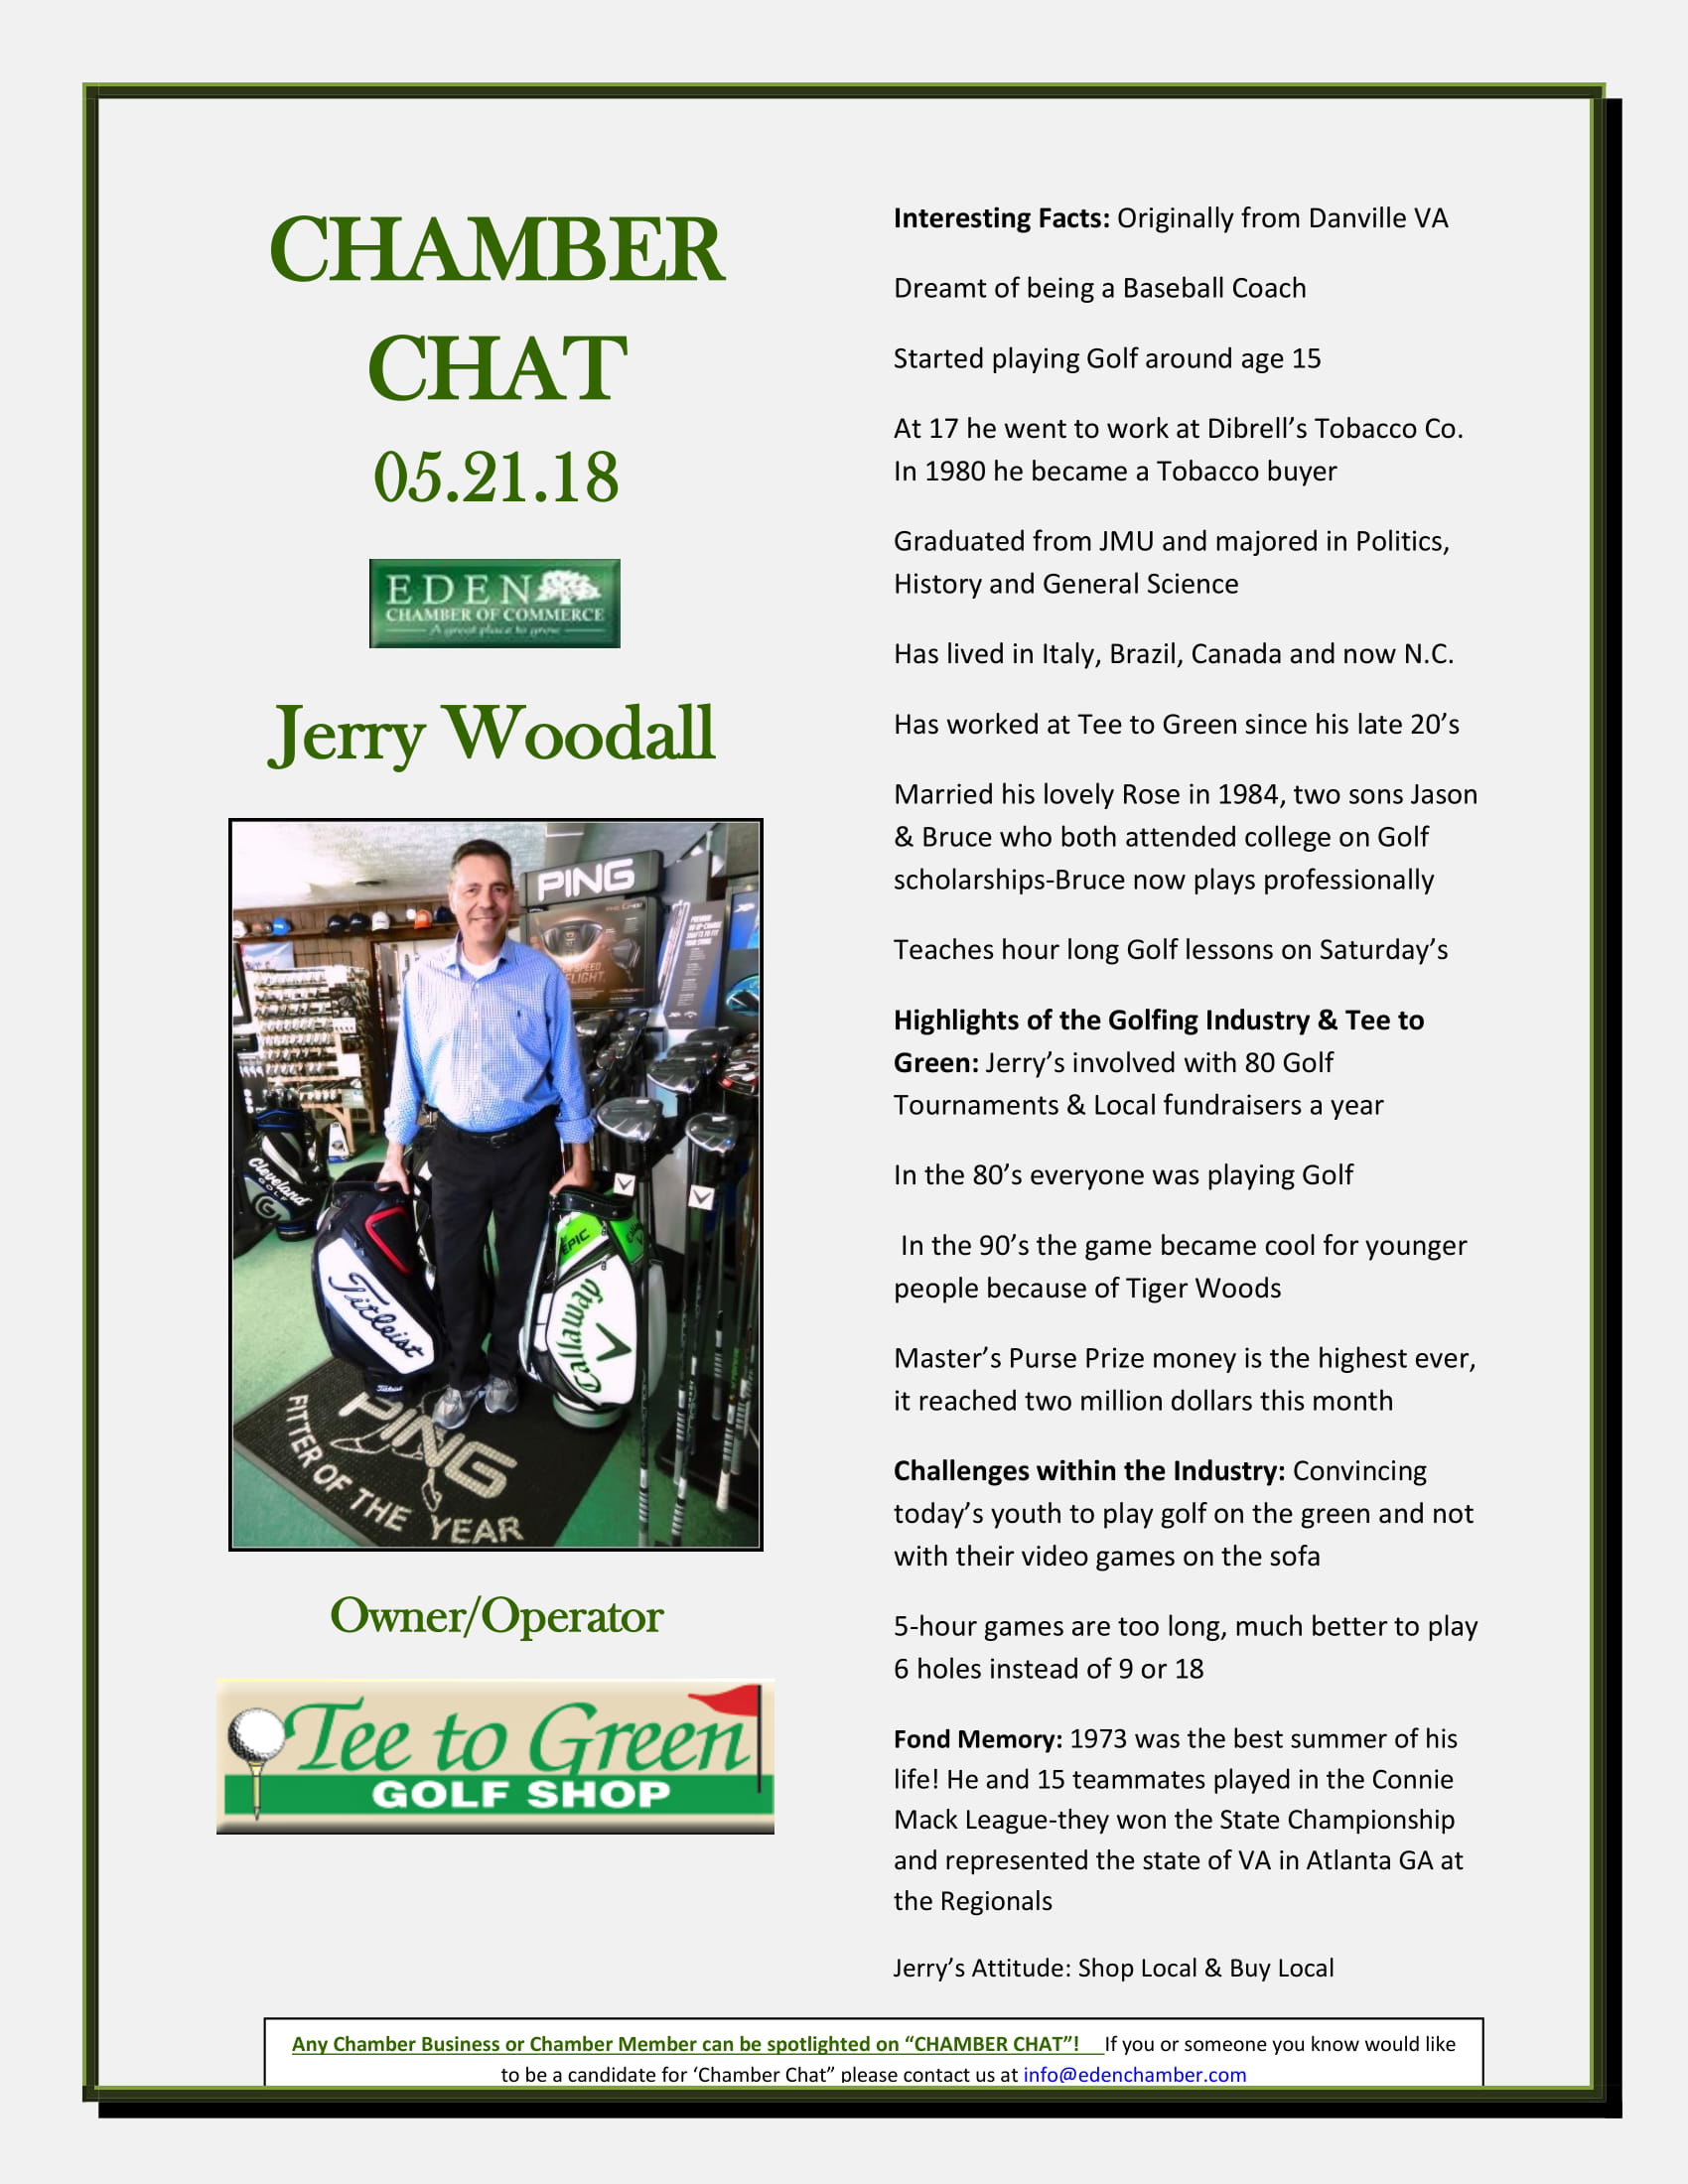 CHAMBER-CHAT-Tee-to-Green-Jerry-Woodall-(2)-1